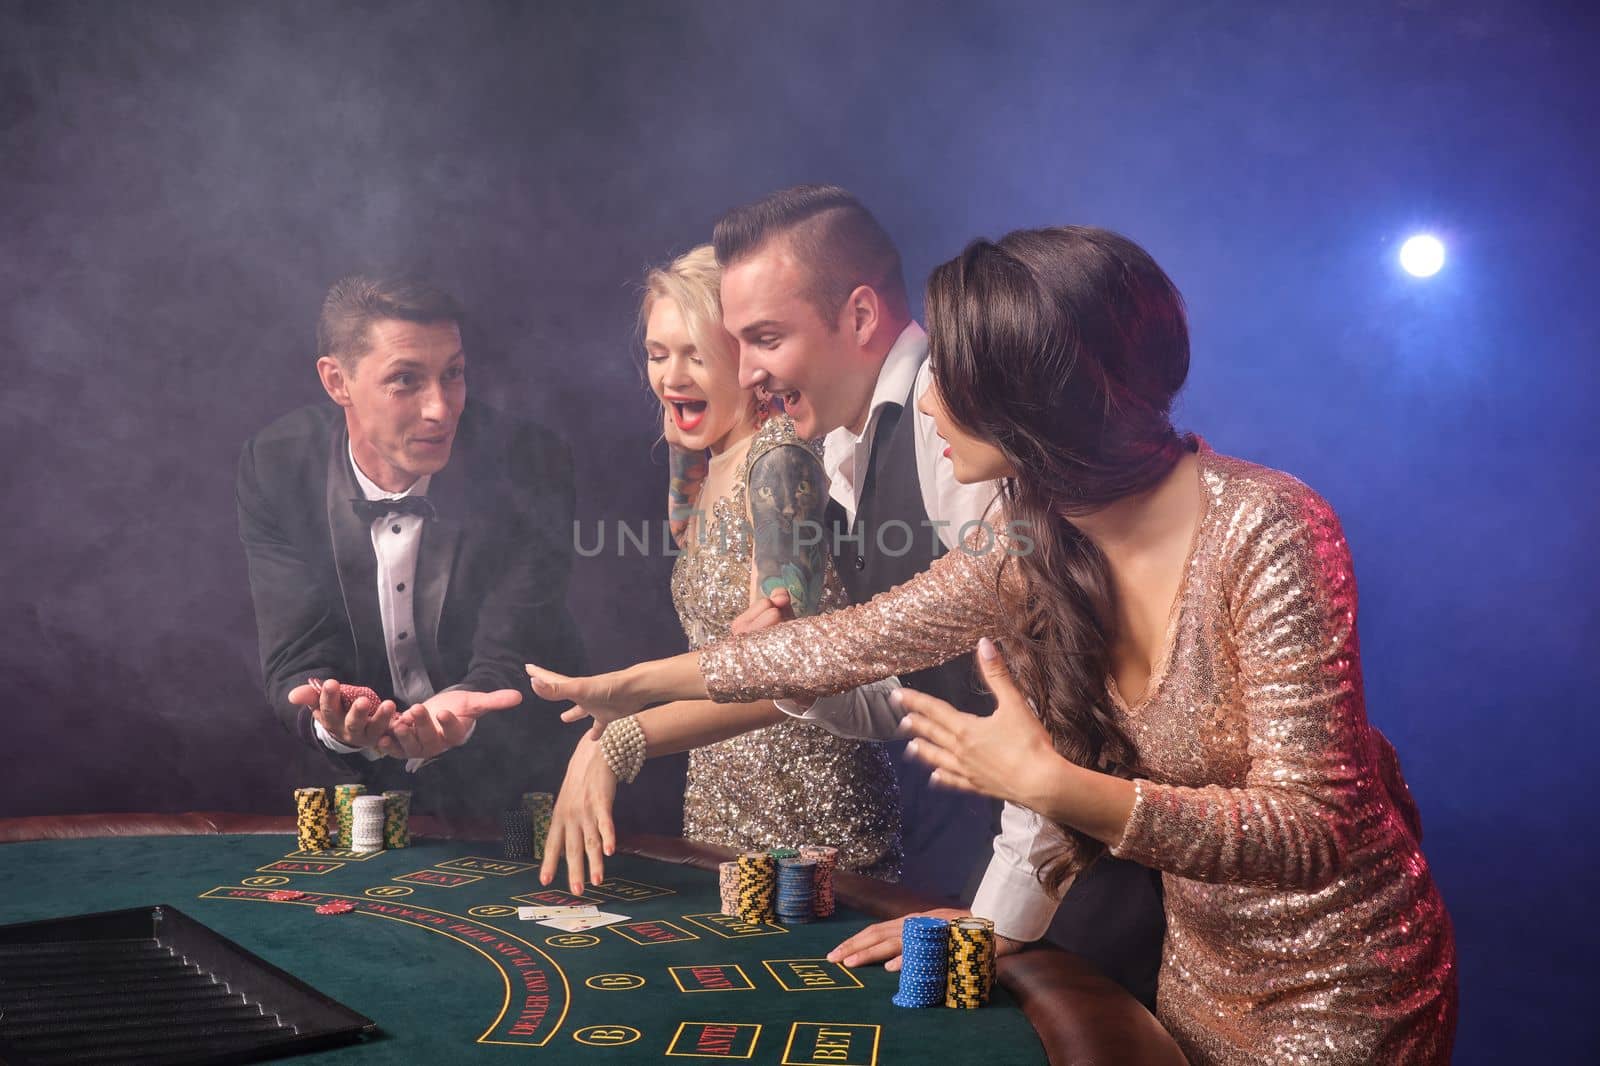 Side shot of a joyful rich buddies playing poker at casino in smoke. Youth are making bets waiting for a big win. They are standing at the table against a red and blue backlights on black background. Risky gambling entertainment.